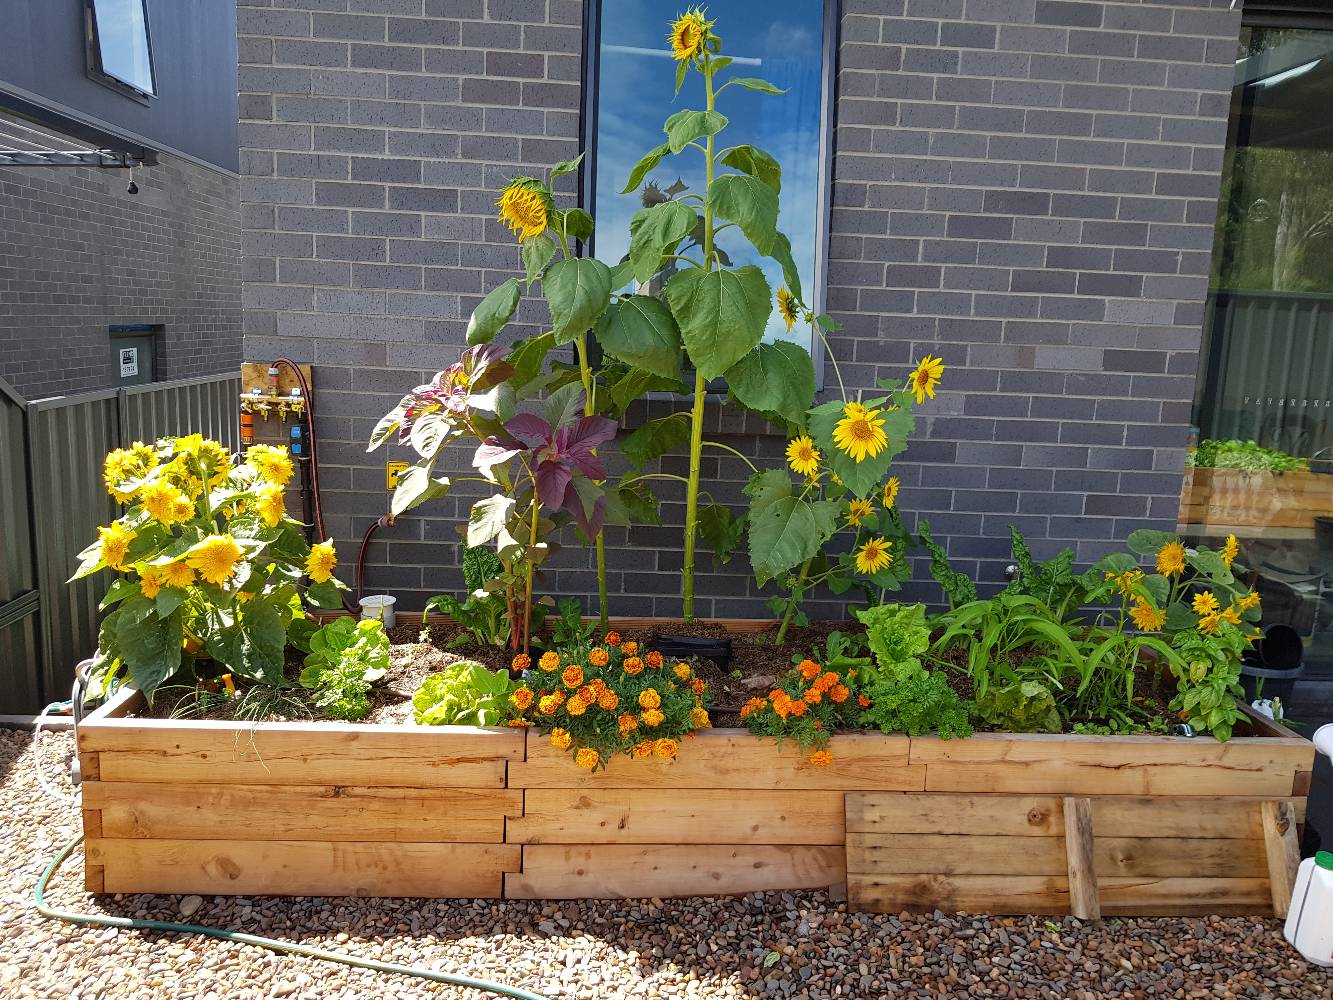 One of our garden beds